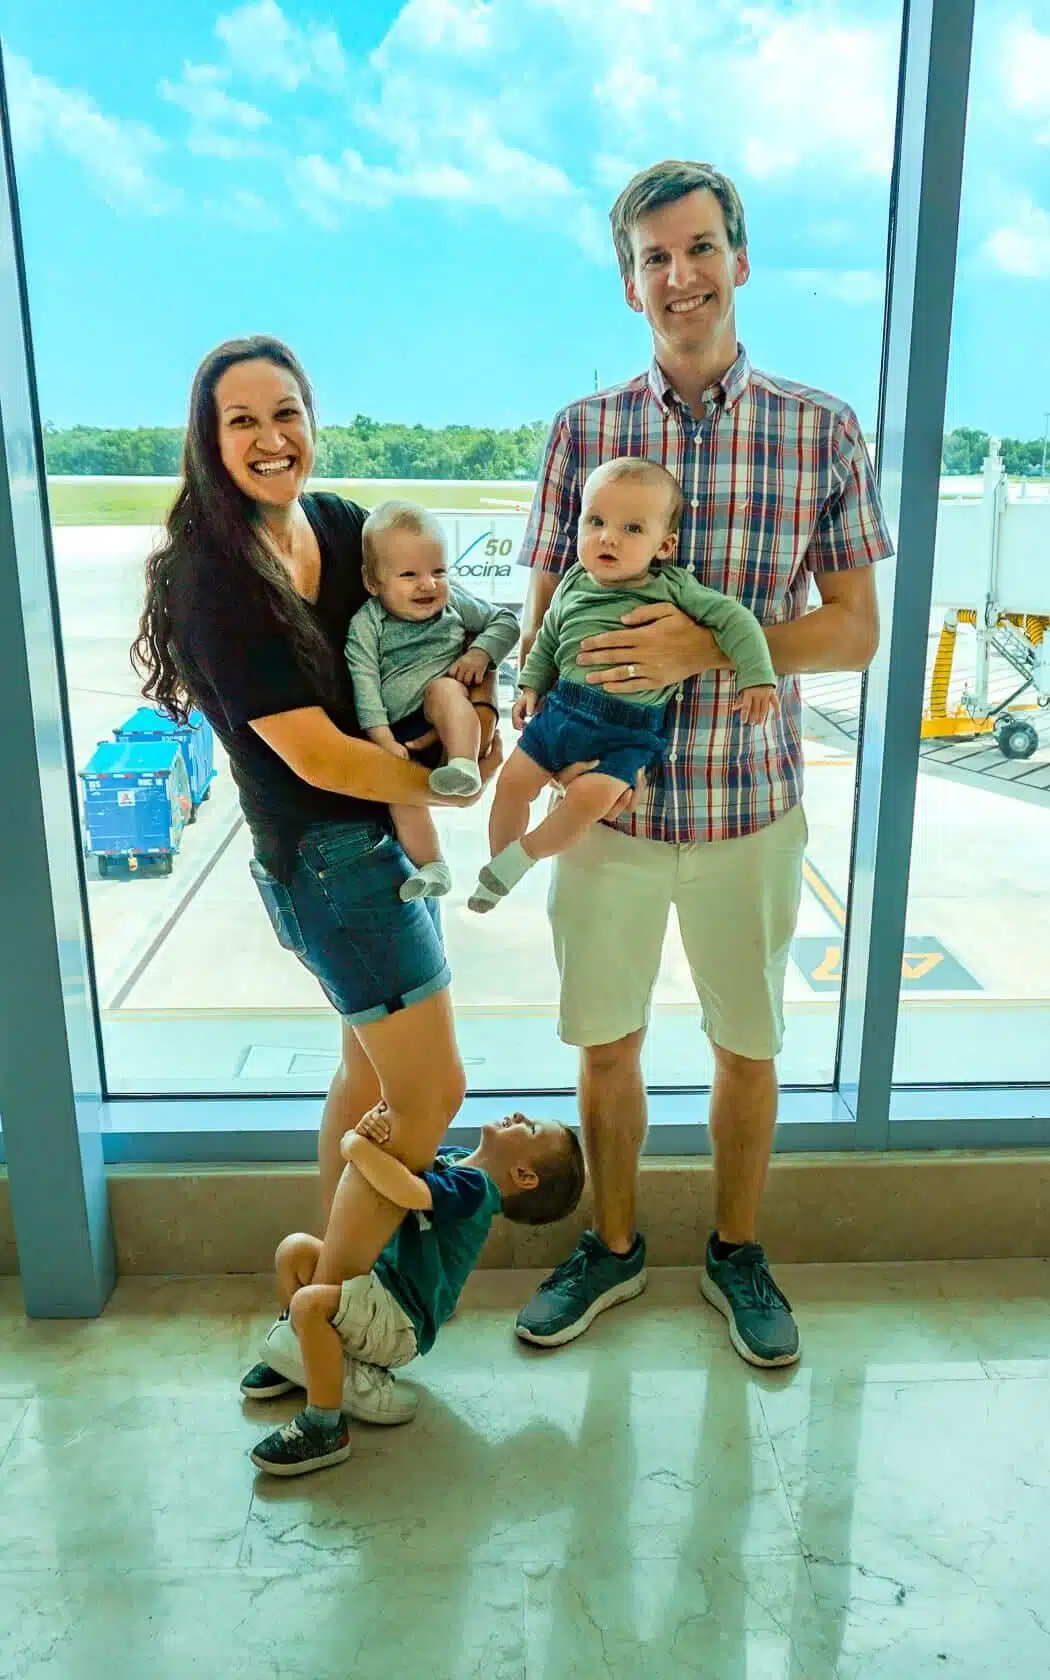 Parents traveling with twins and a toddler hanging on his mom's legs at the airport.